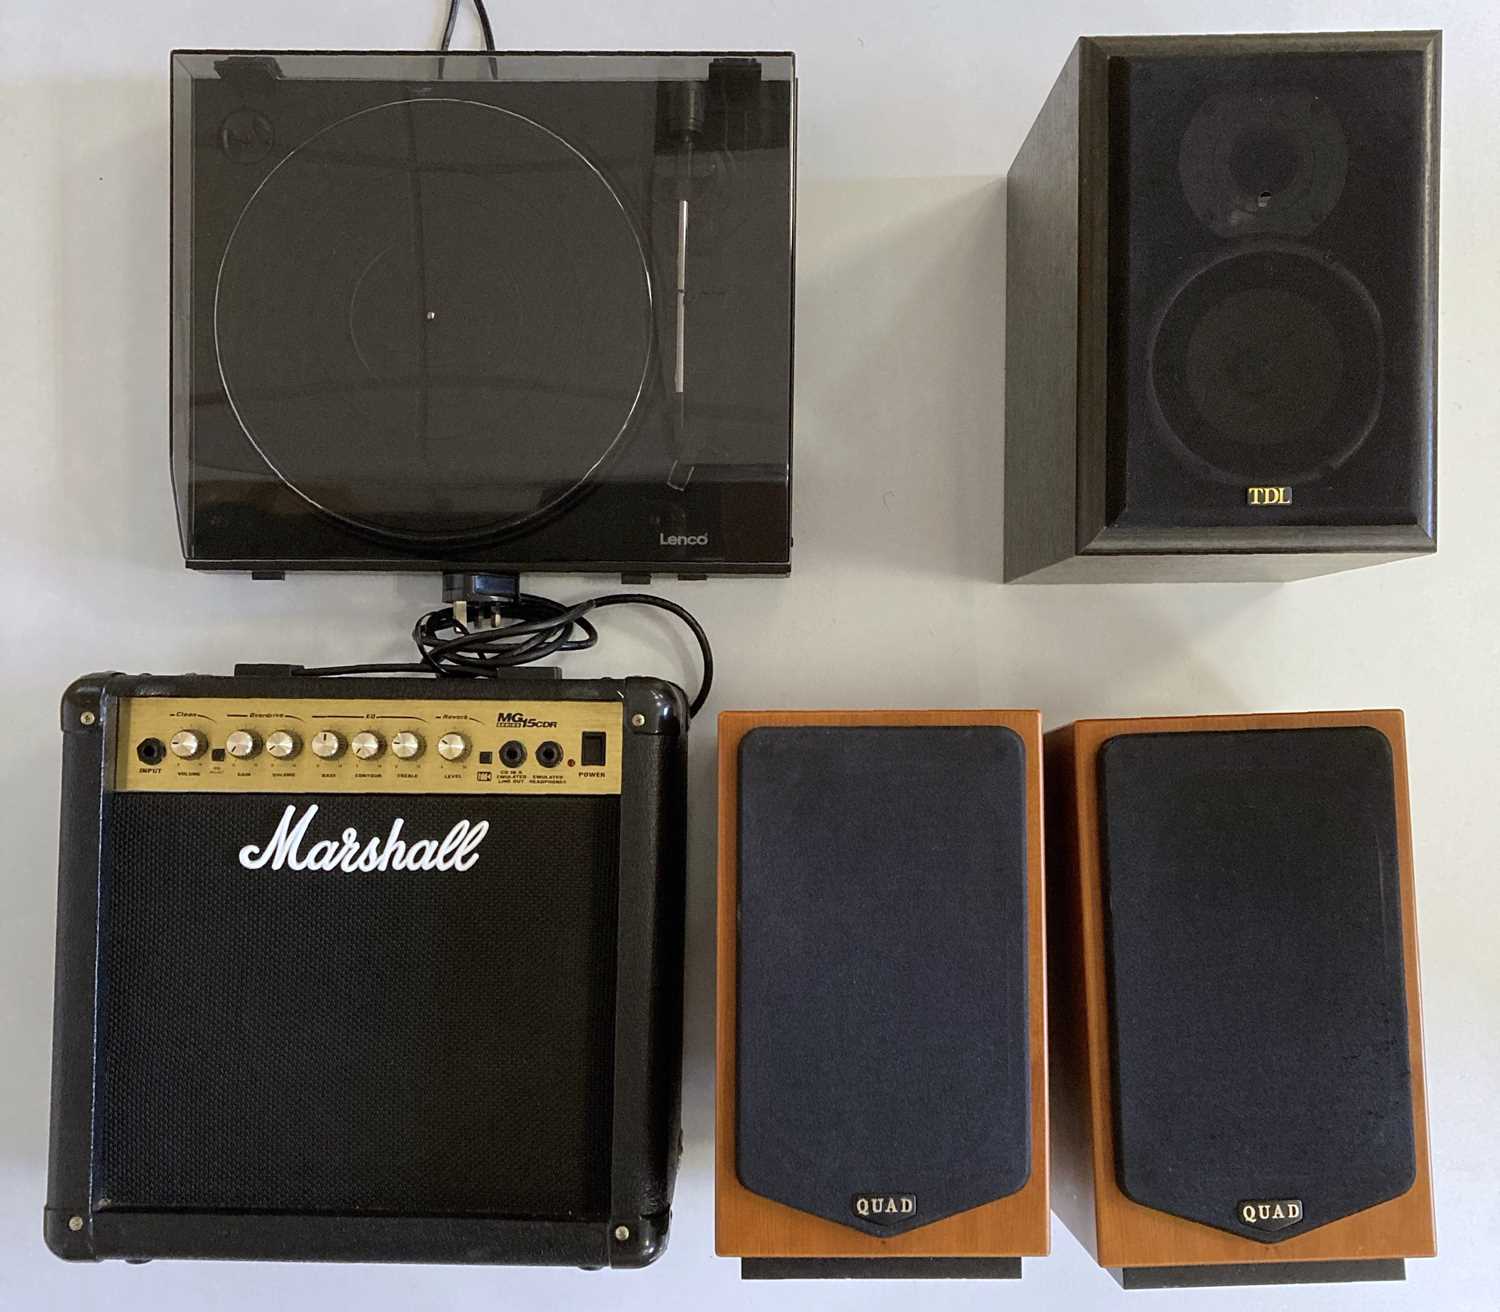 Lot 6 - Marshall Guitar Amplifier, Speakers and Turntable.